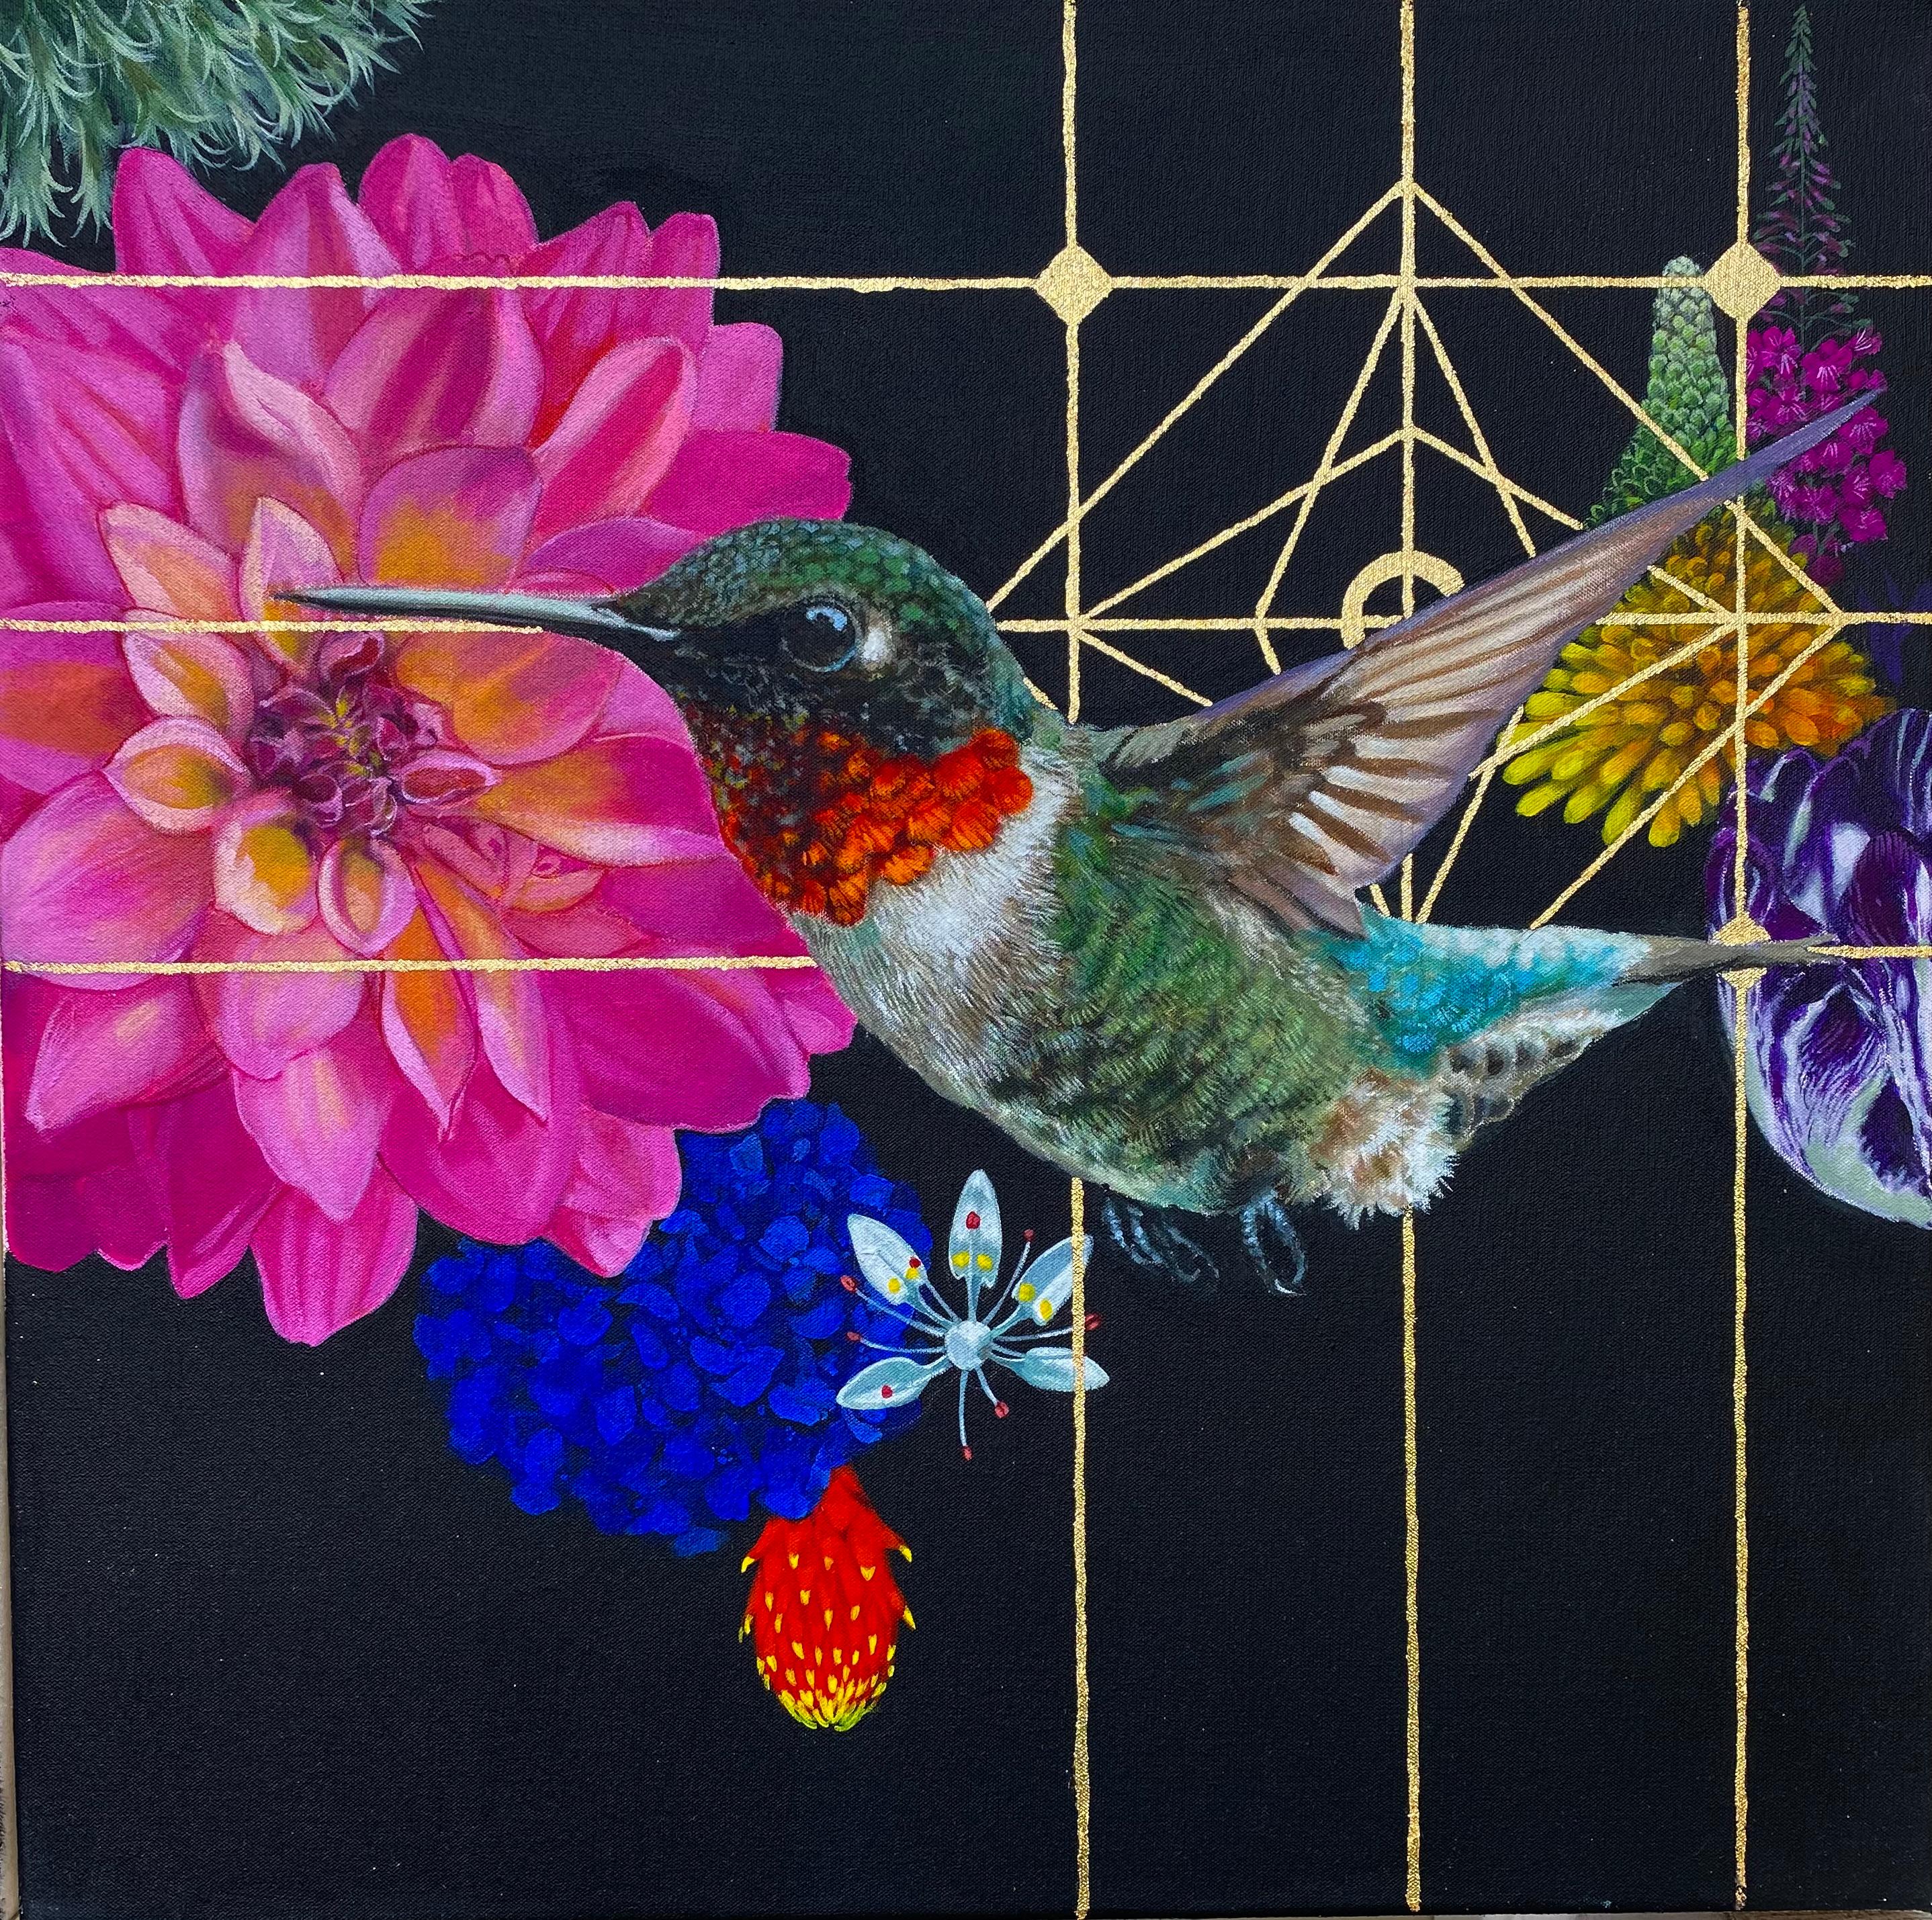 Louise - contemporary mixed media colorful hummingbird flowers framed painting - Painting by Keng Wai Lee